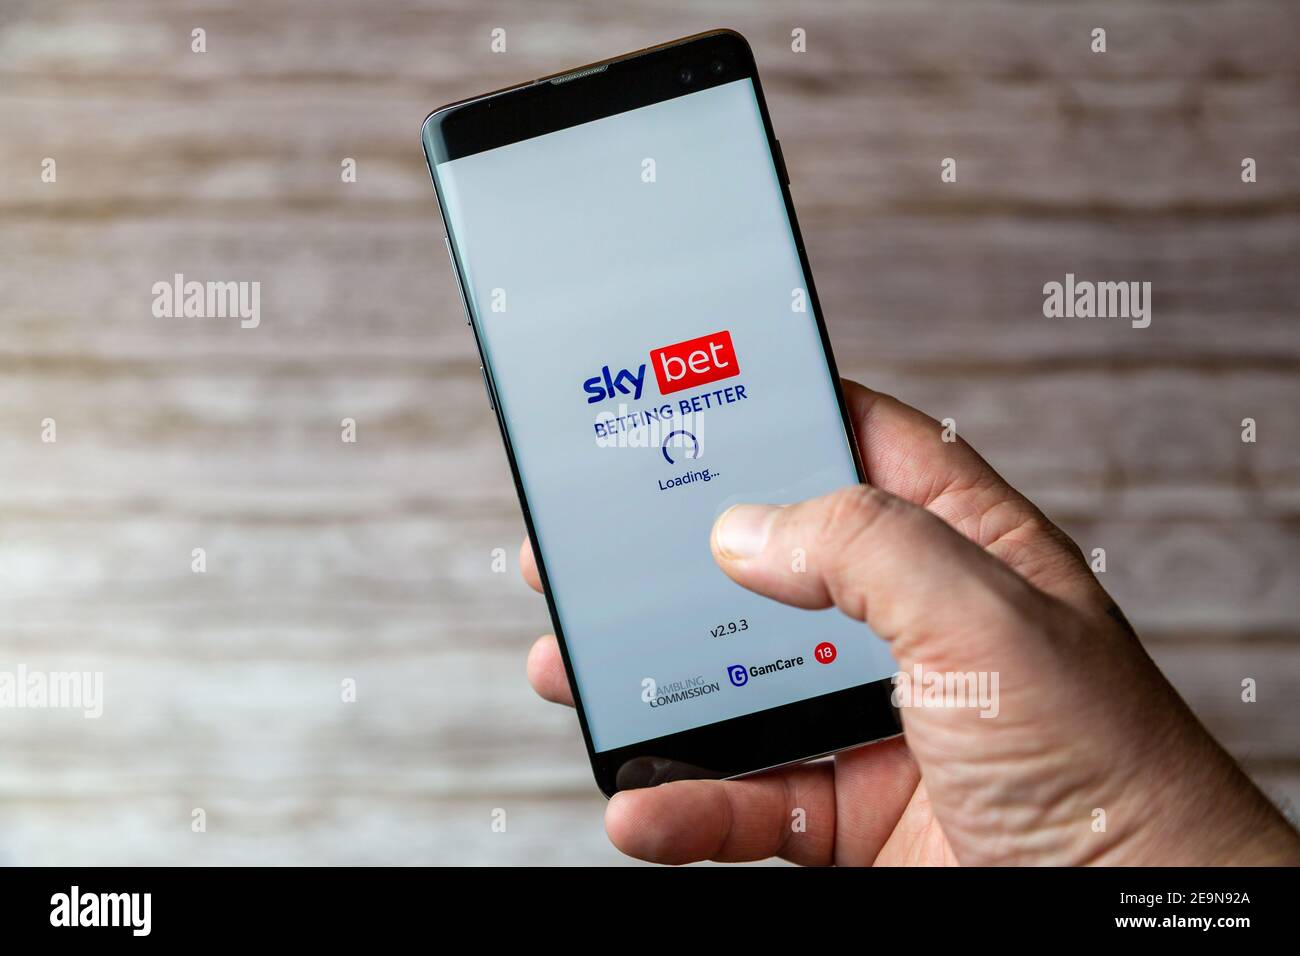 A Mobile phone or cell phone being held showing the Sky bet app open on screen Stock Photo